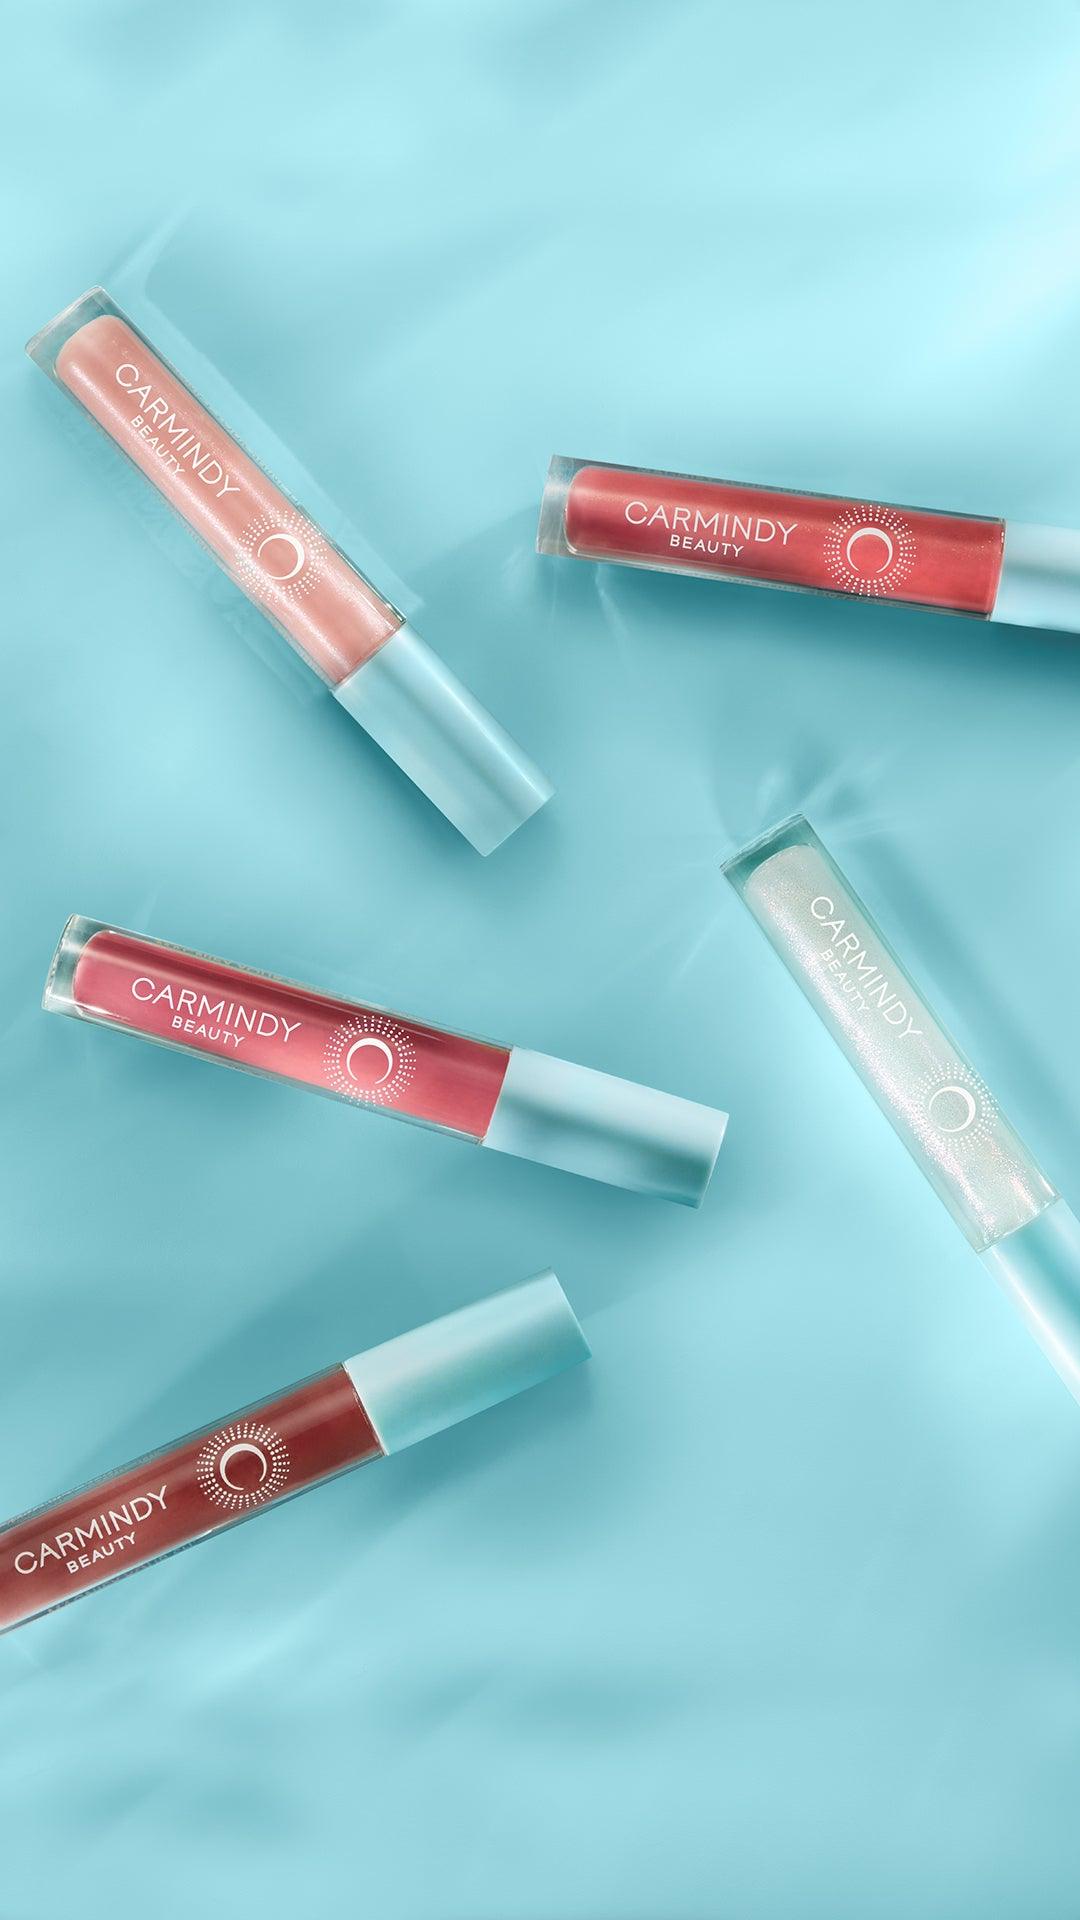 MAGNIFY YOUR SHINE LIP GLOSS - SCENT BEAUTY